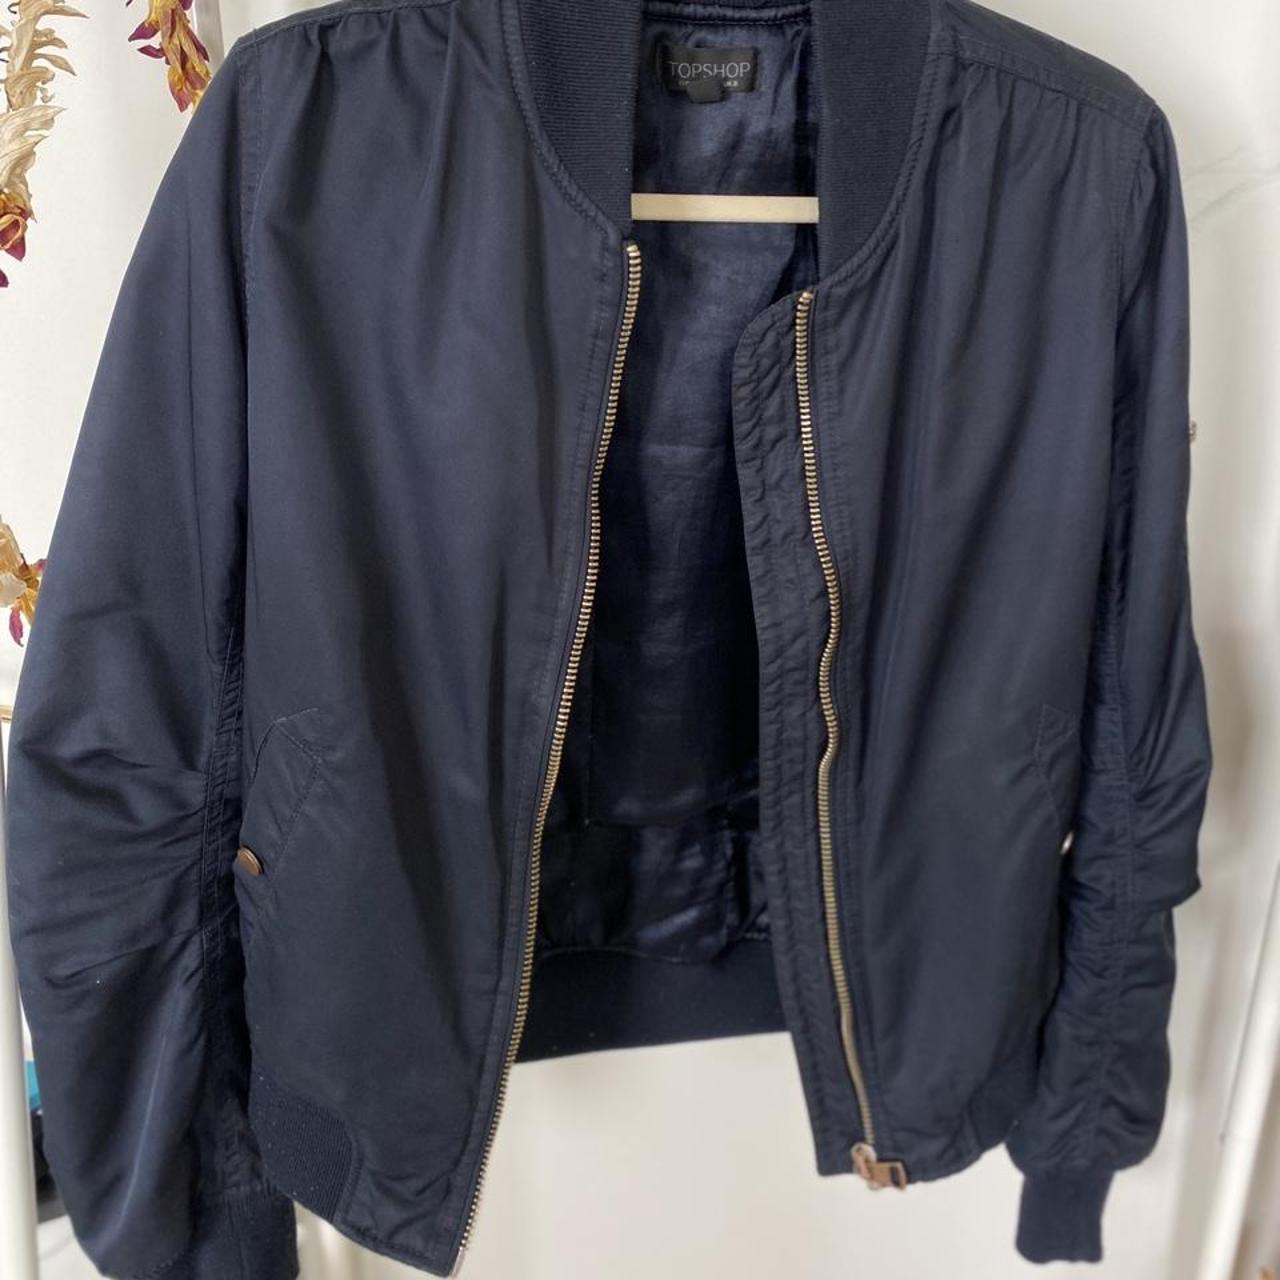 NAVY BOMBER JACKET. Purchased from Topshop! #bomber... - Depop